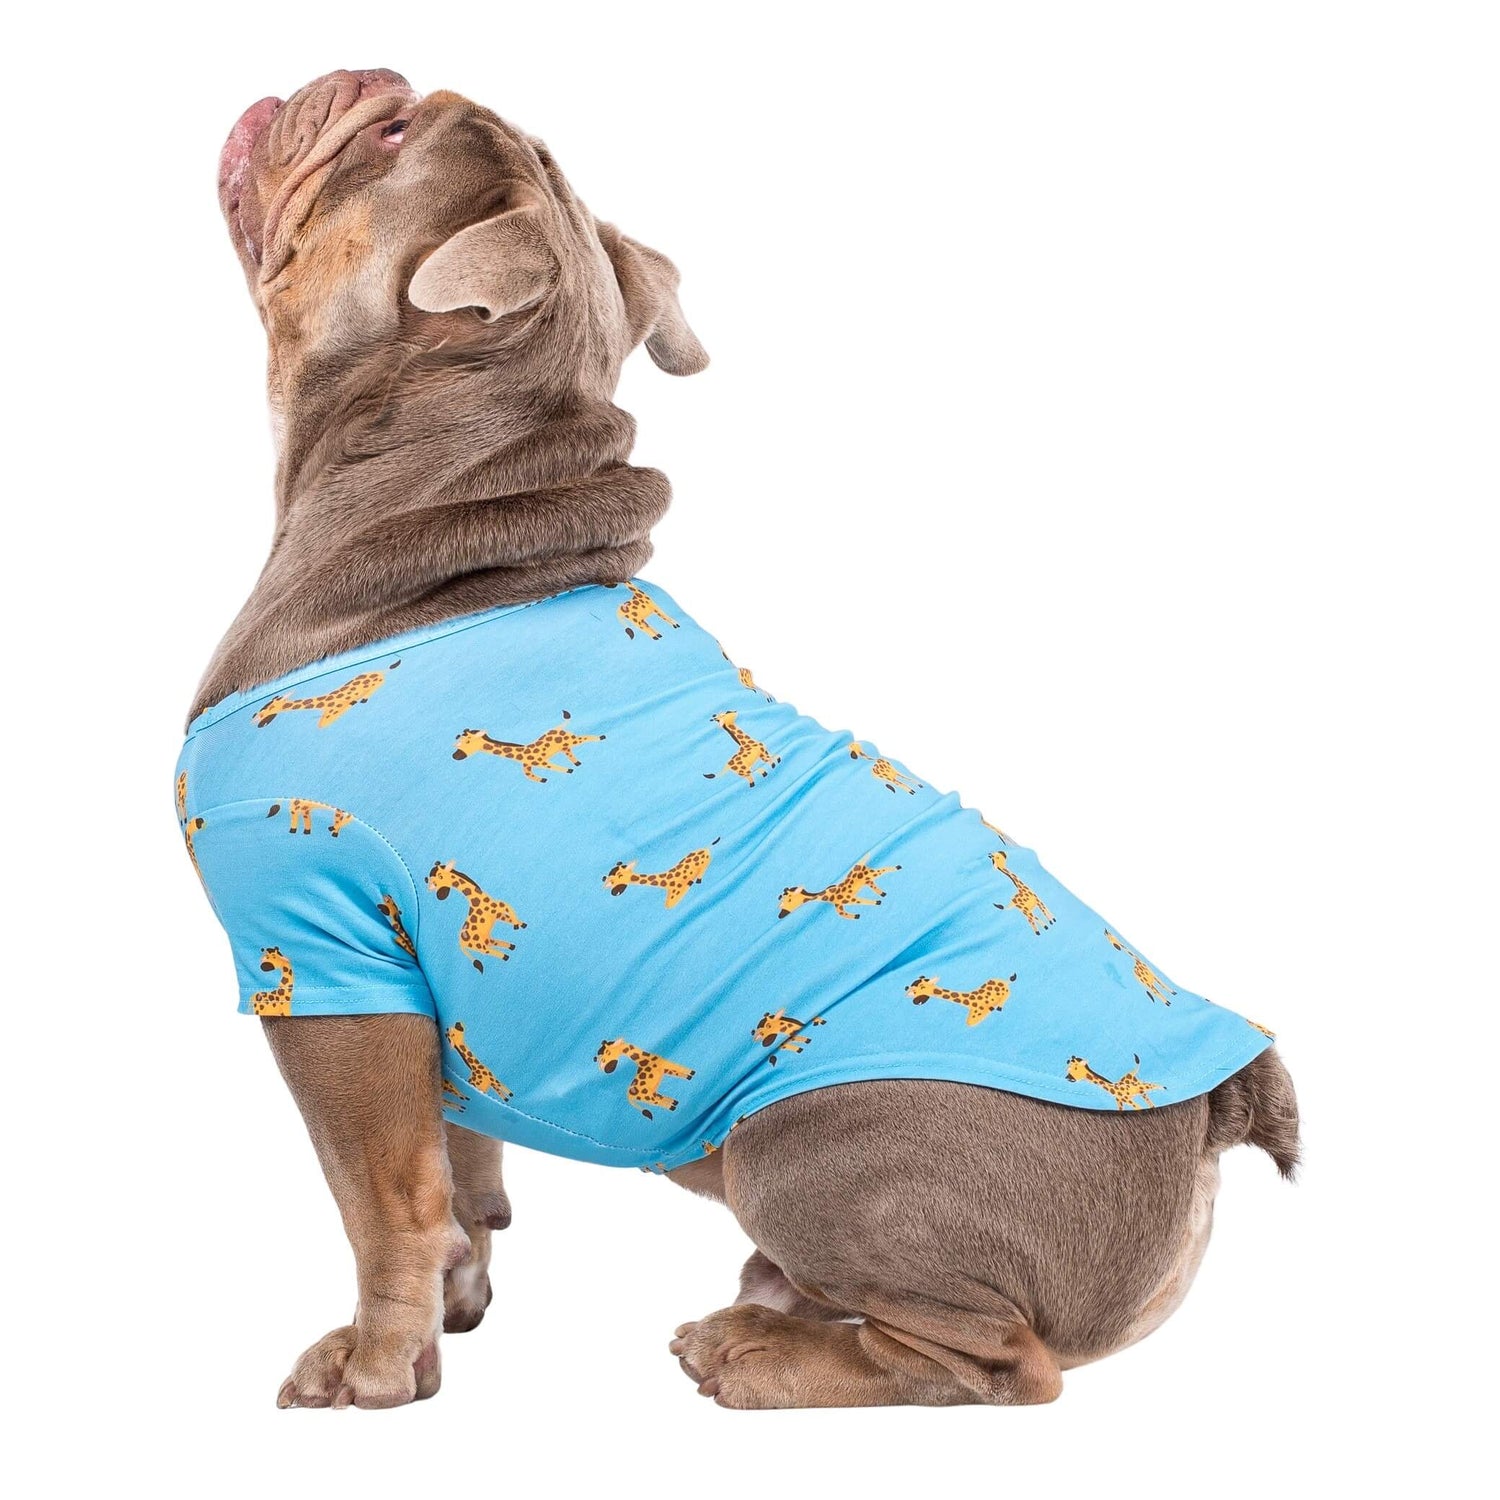 An English bulldog standing side on. He is wearing Gerald the Giraffe dog pyjamas made by Vibrant Hound. The dog pyjamas are blue, with girrafes printed on them.